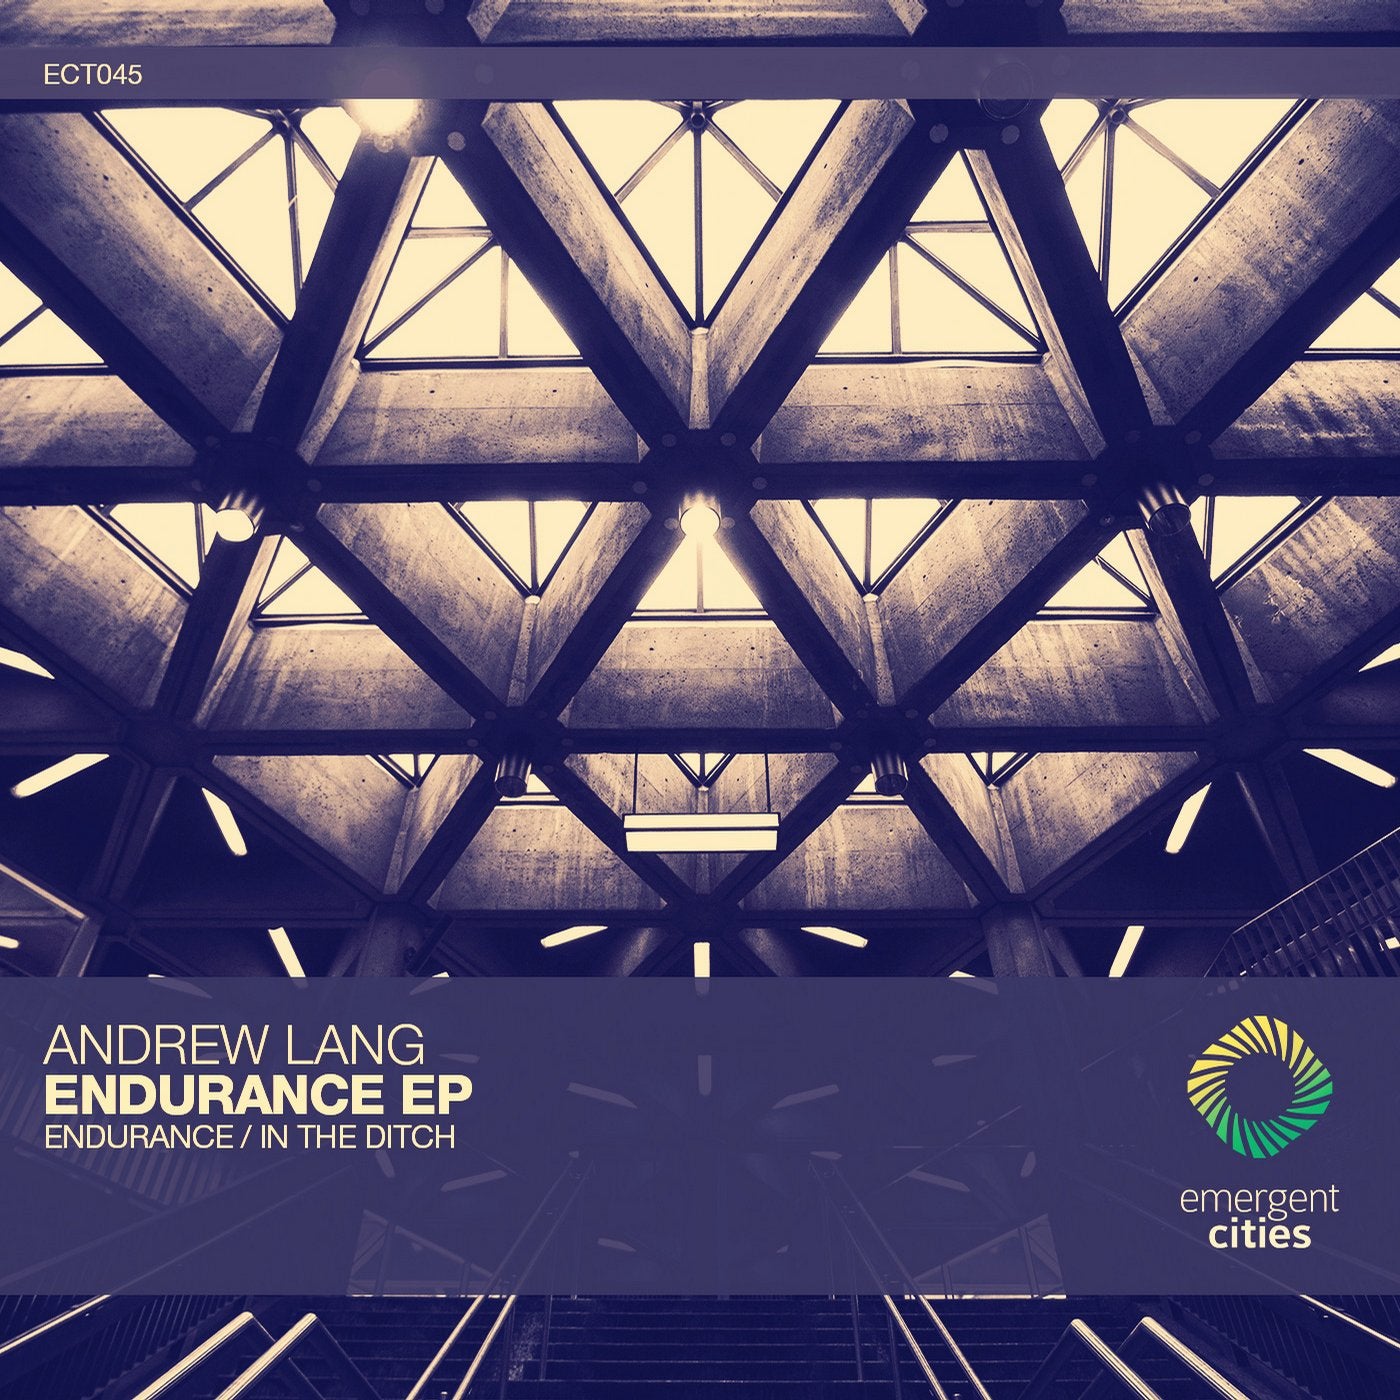 Endurance / in the Ditch